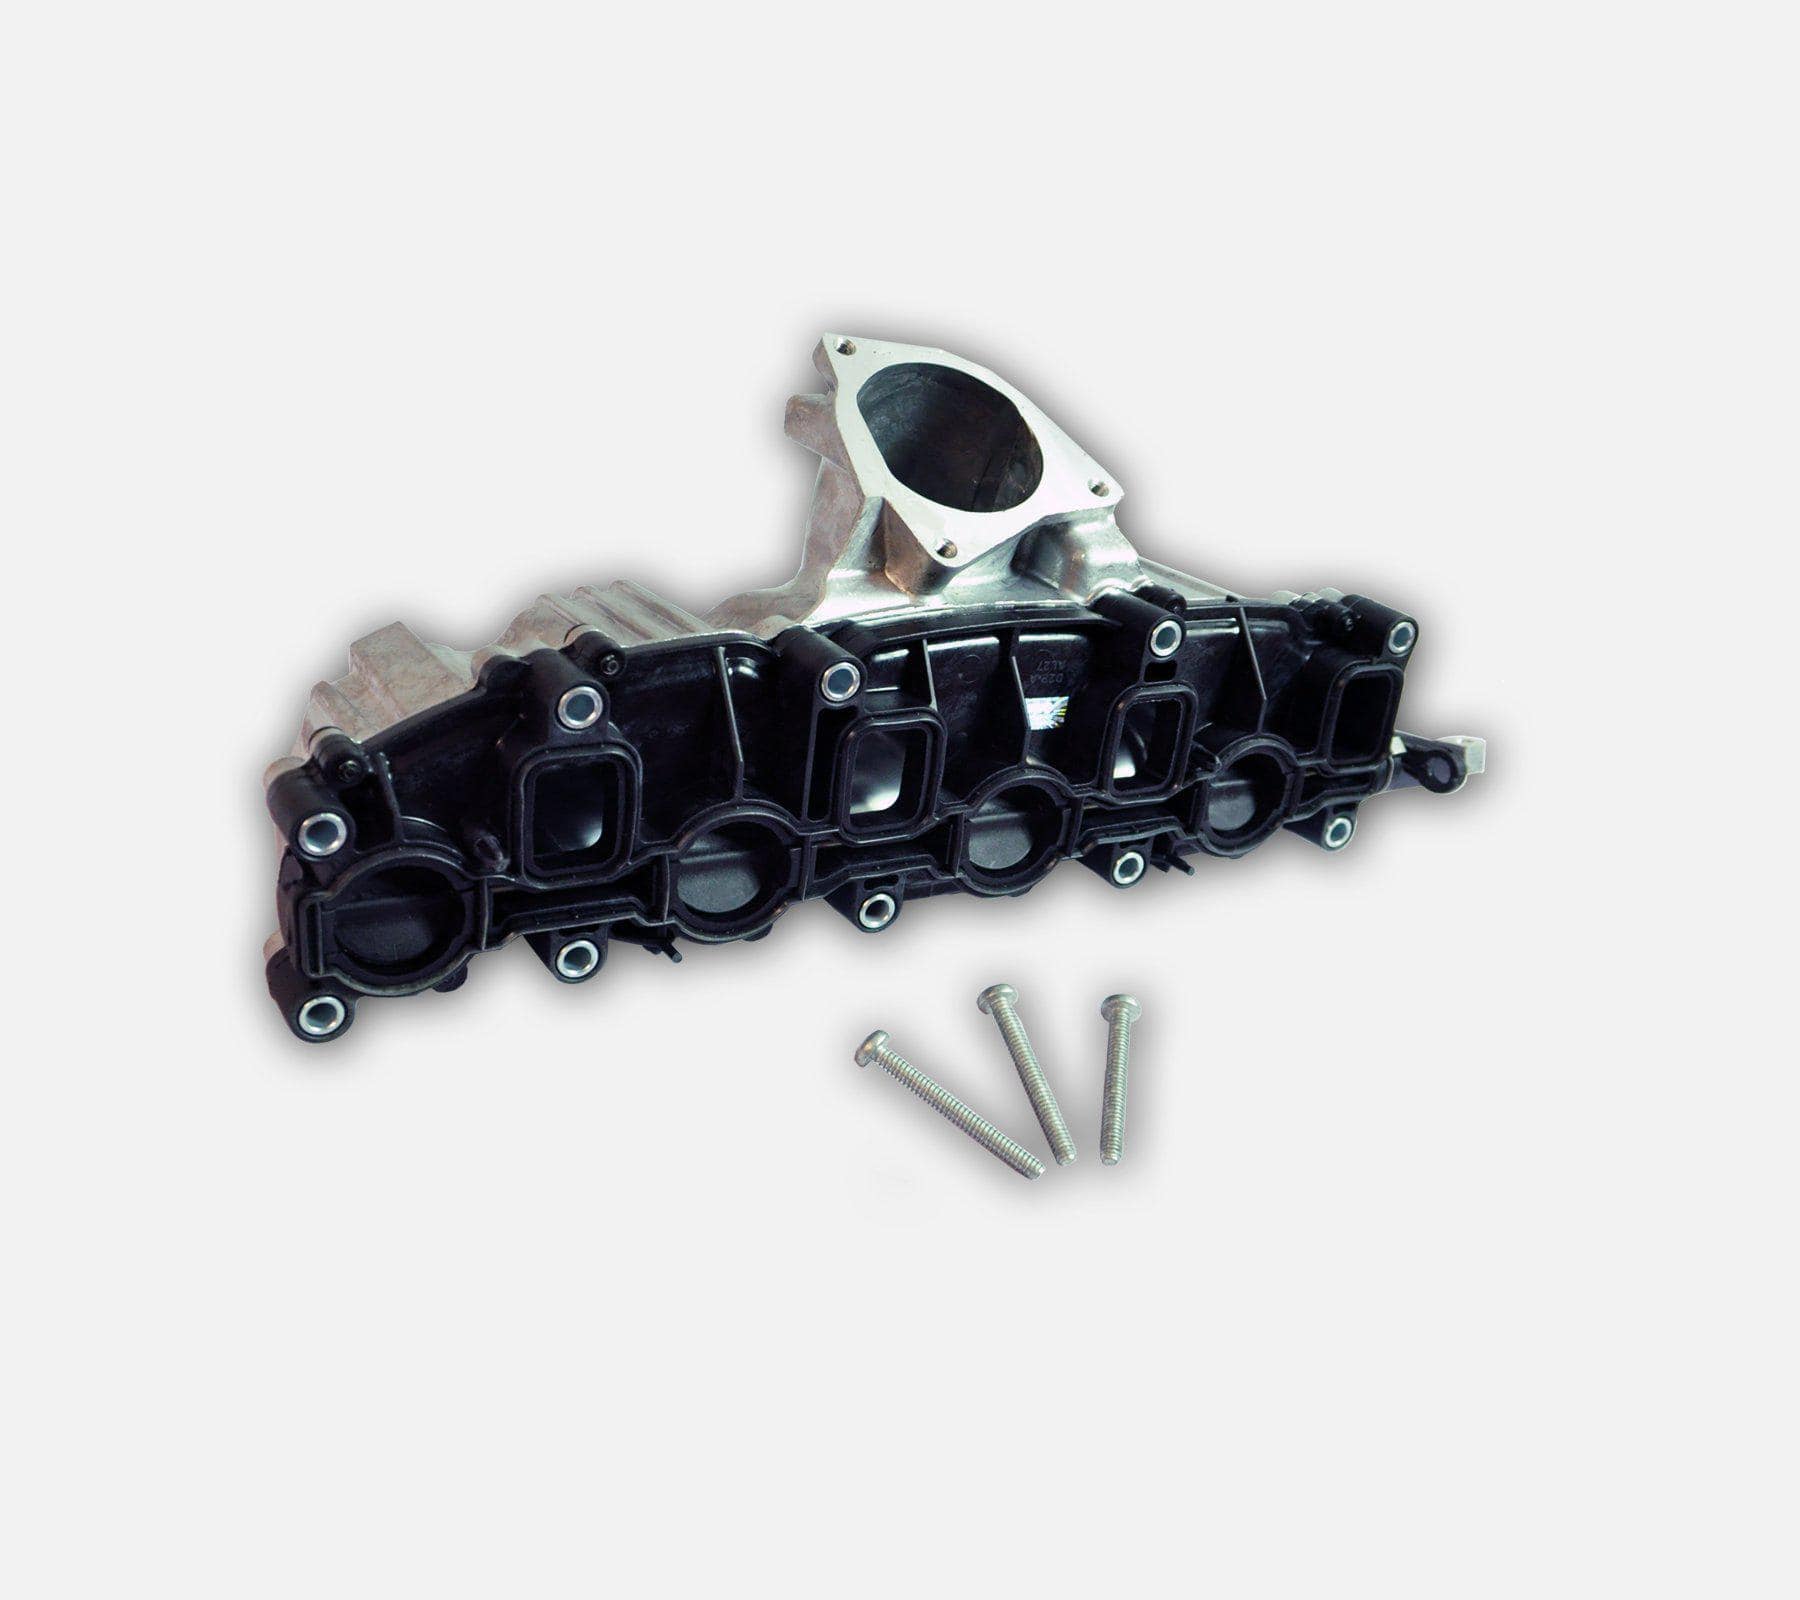 Intake Manifold (Swirl Flap Cover) For Audi, VW, Seat, and Skoda D2P  Autoparts